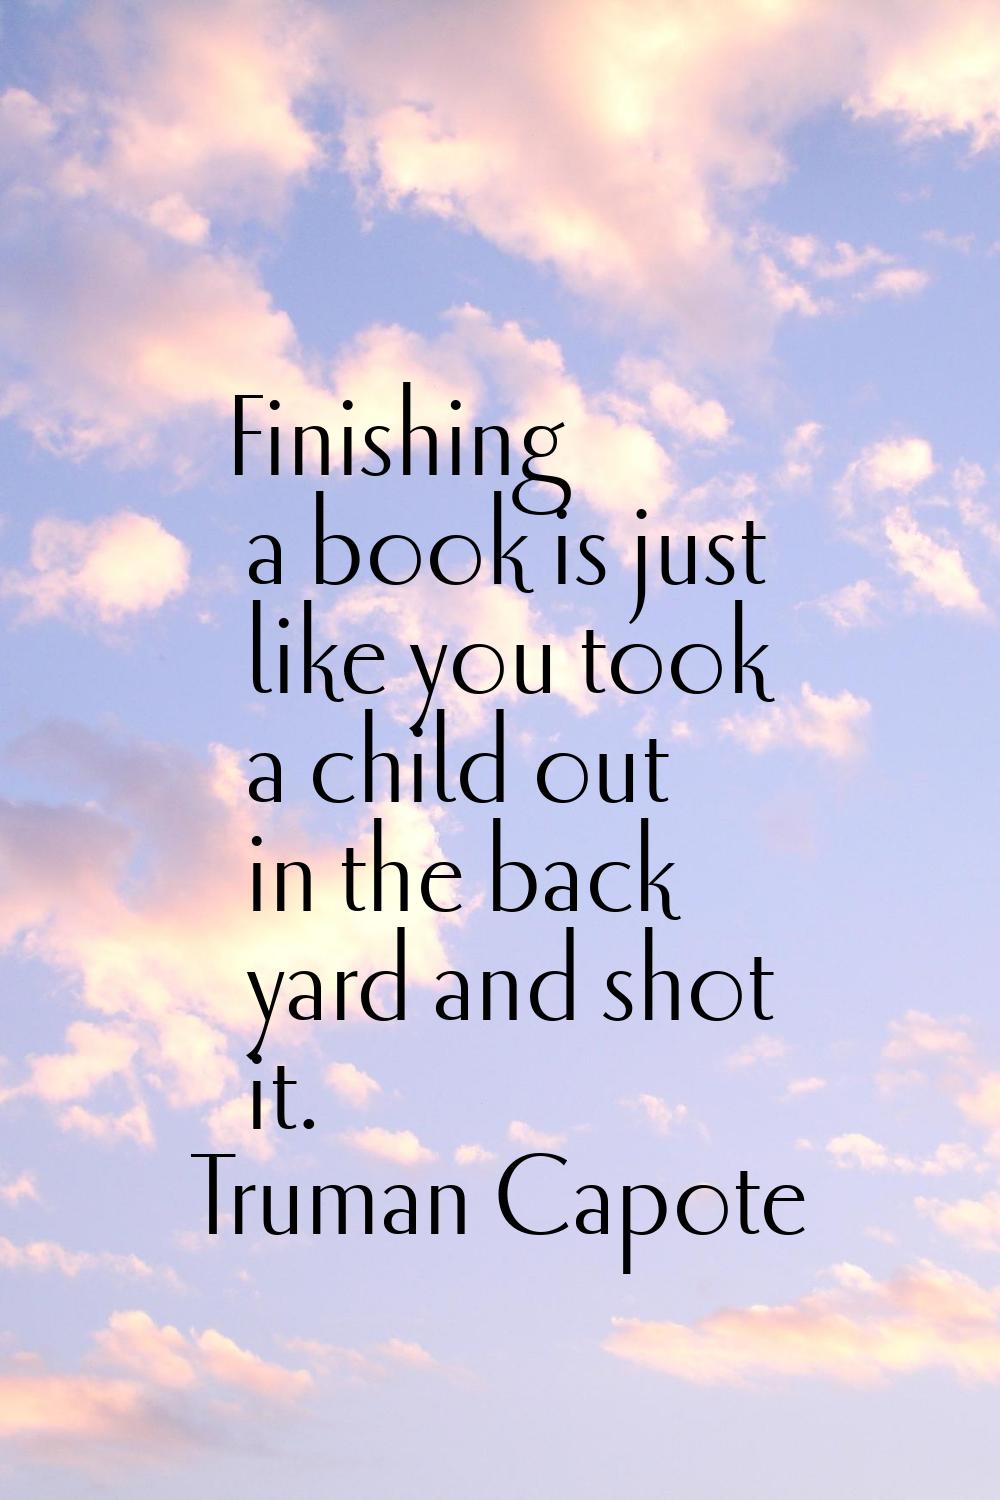 Finishing a book is just like you took a child out in the back yard and shot it.